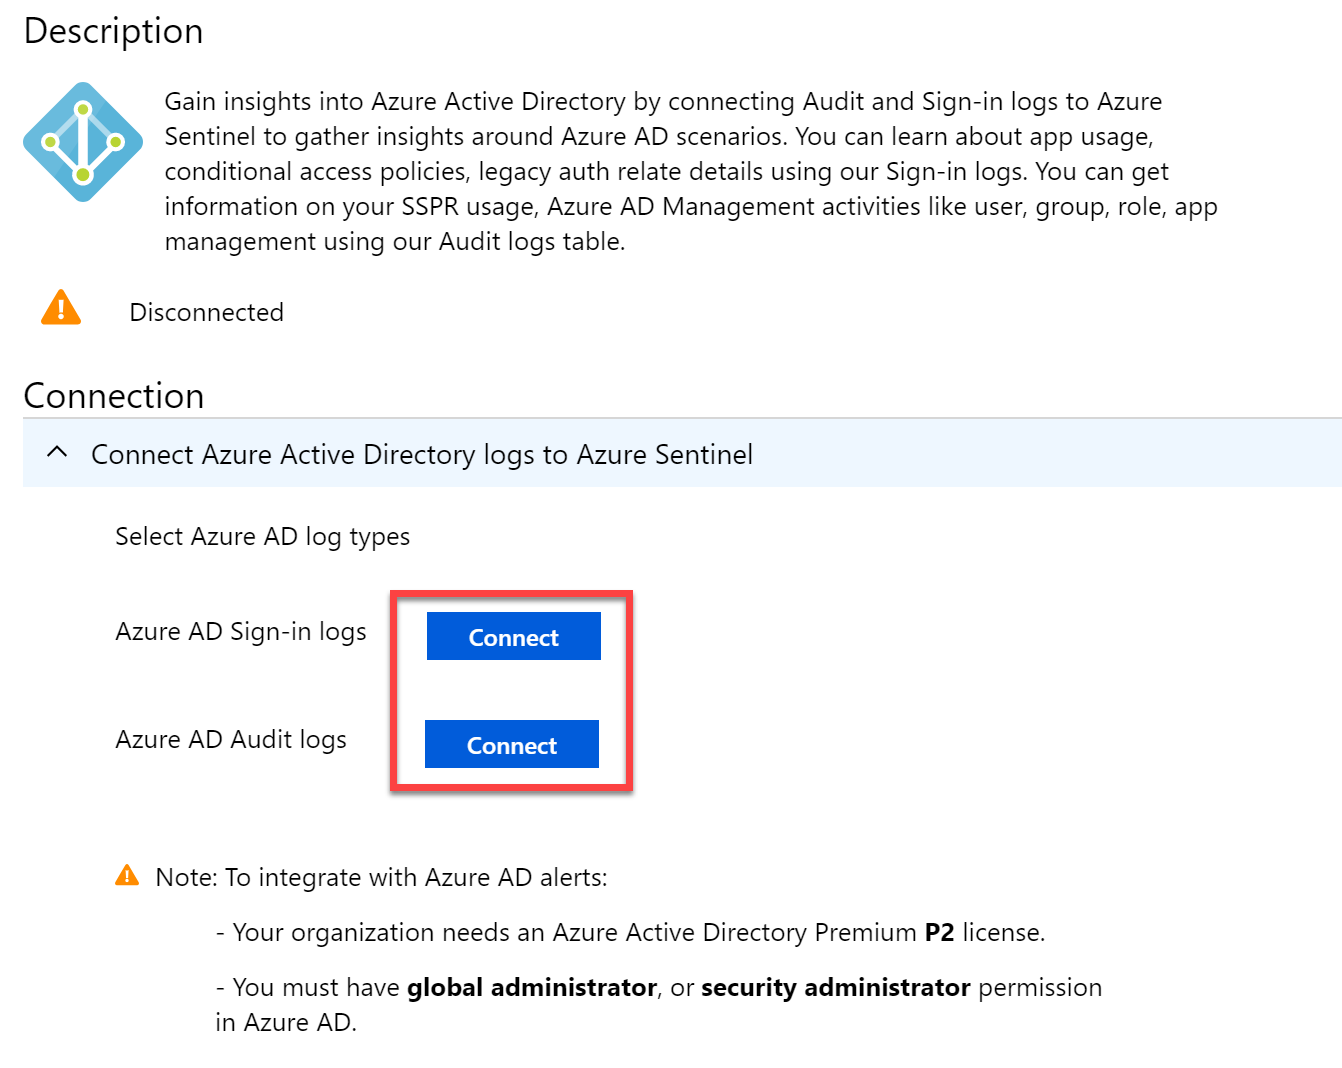 Connect to Azure AD Sign-in logs